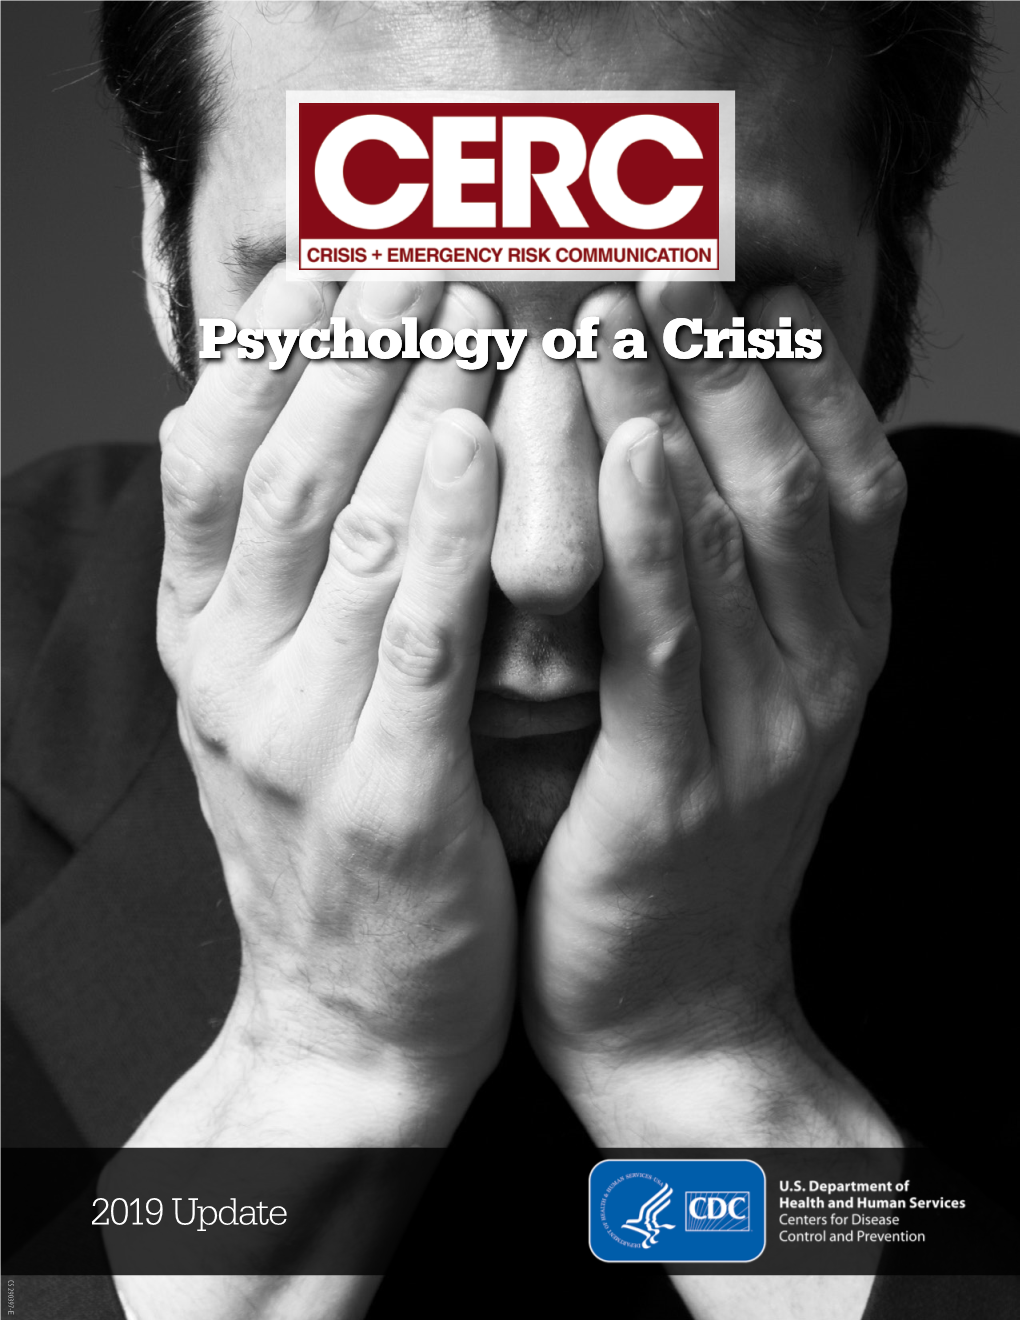 CERC: Psychology of a Crisis Explanations of Figures for Accessibility Found in the Appendix: Accessible Explanation of Figures on Page 16